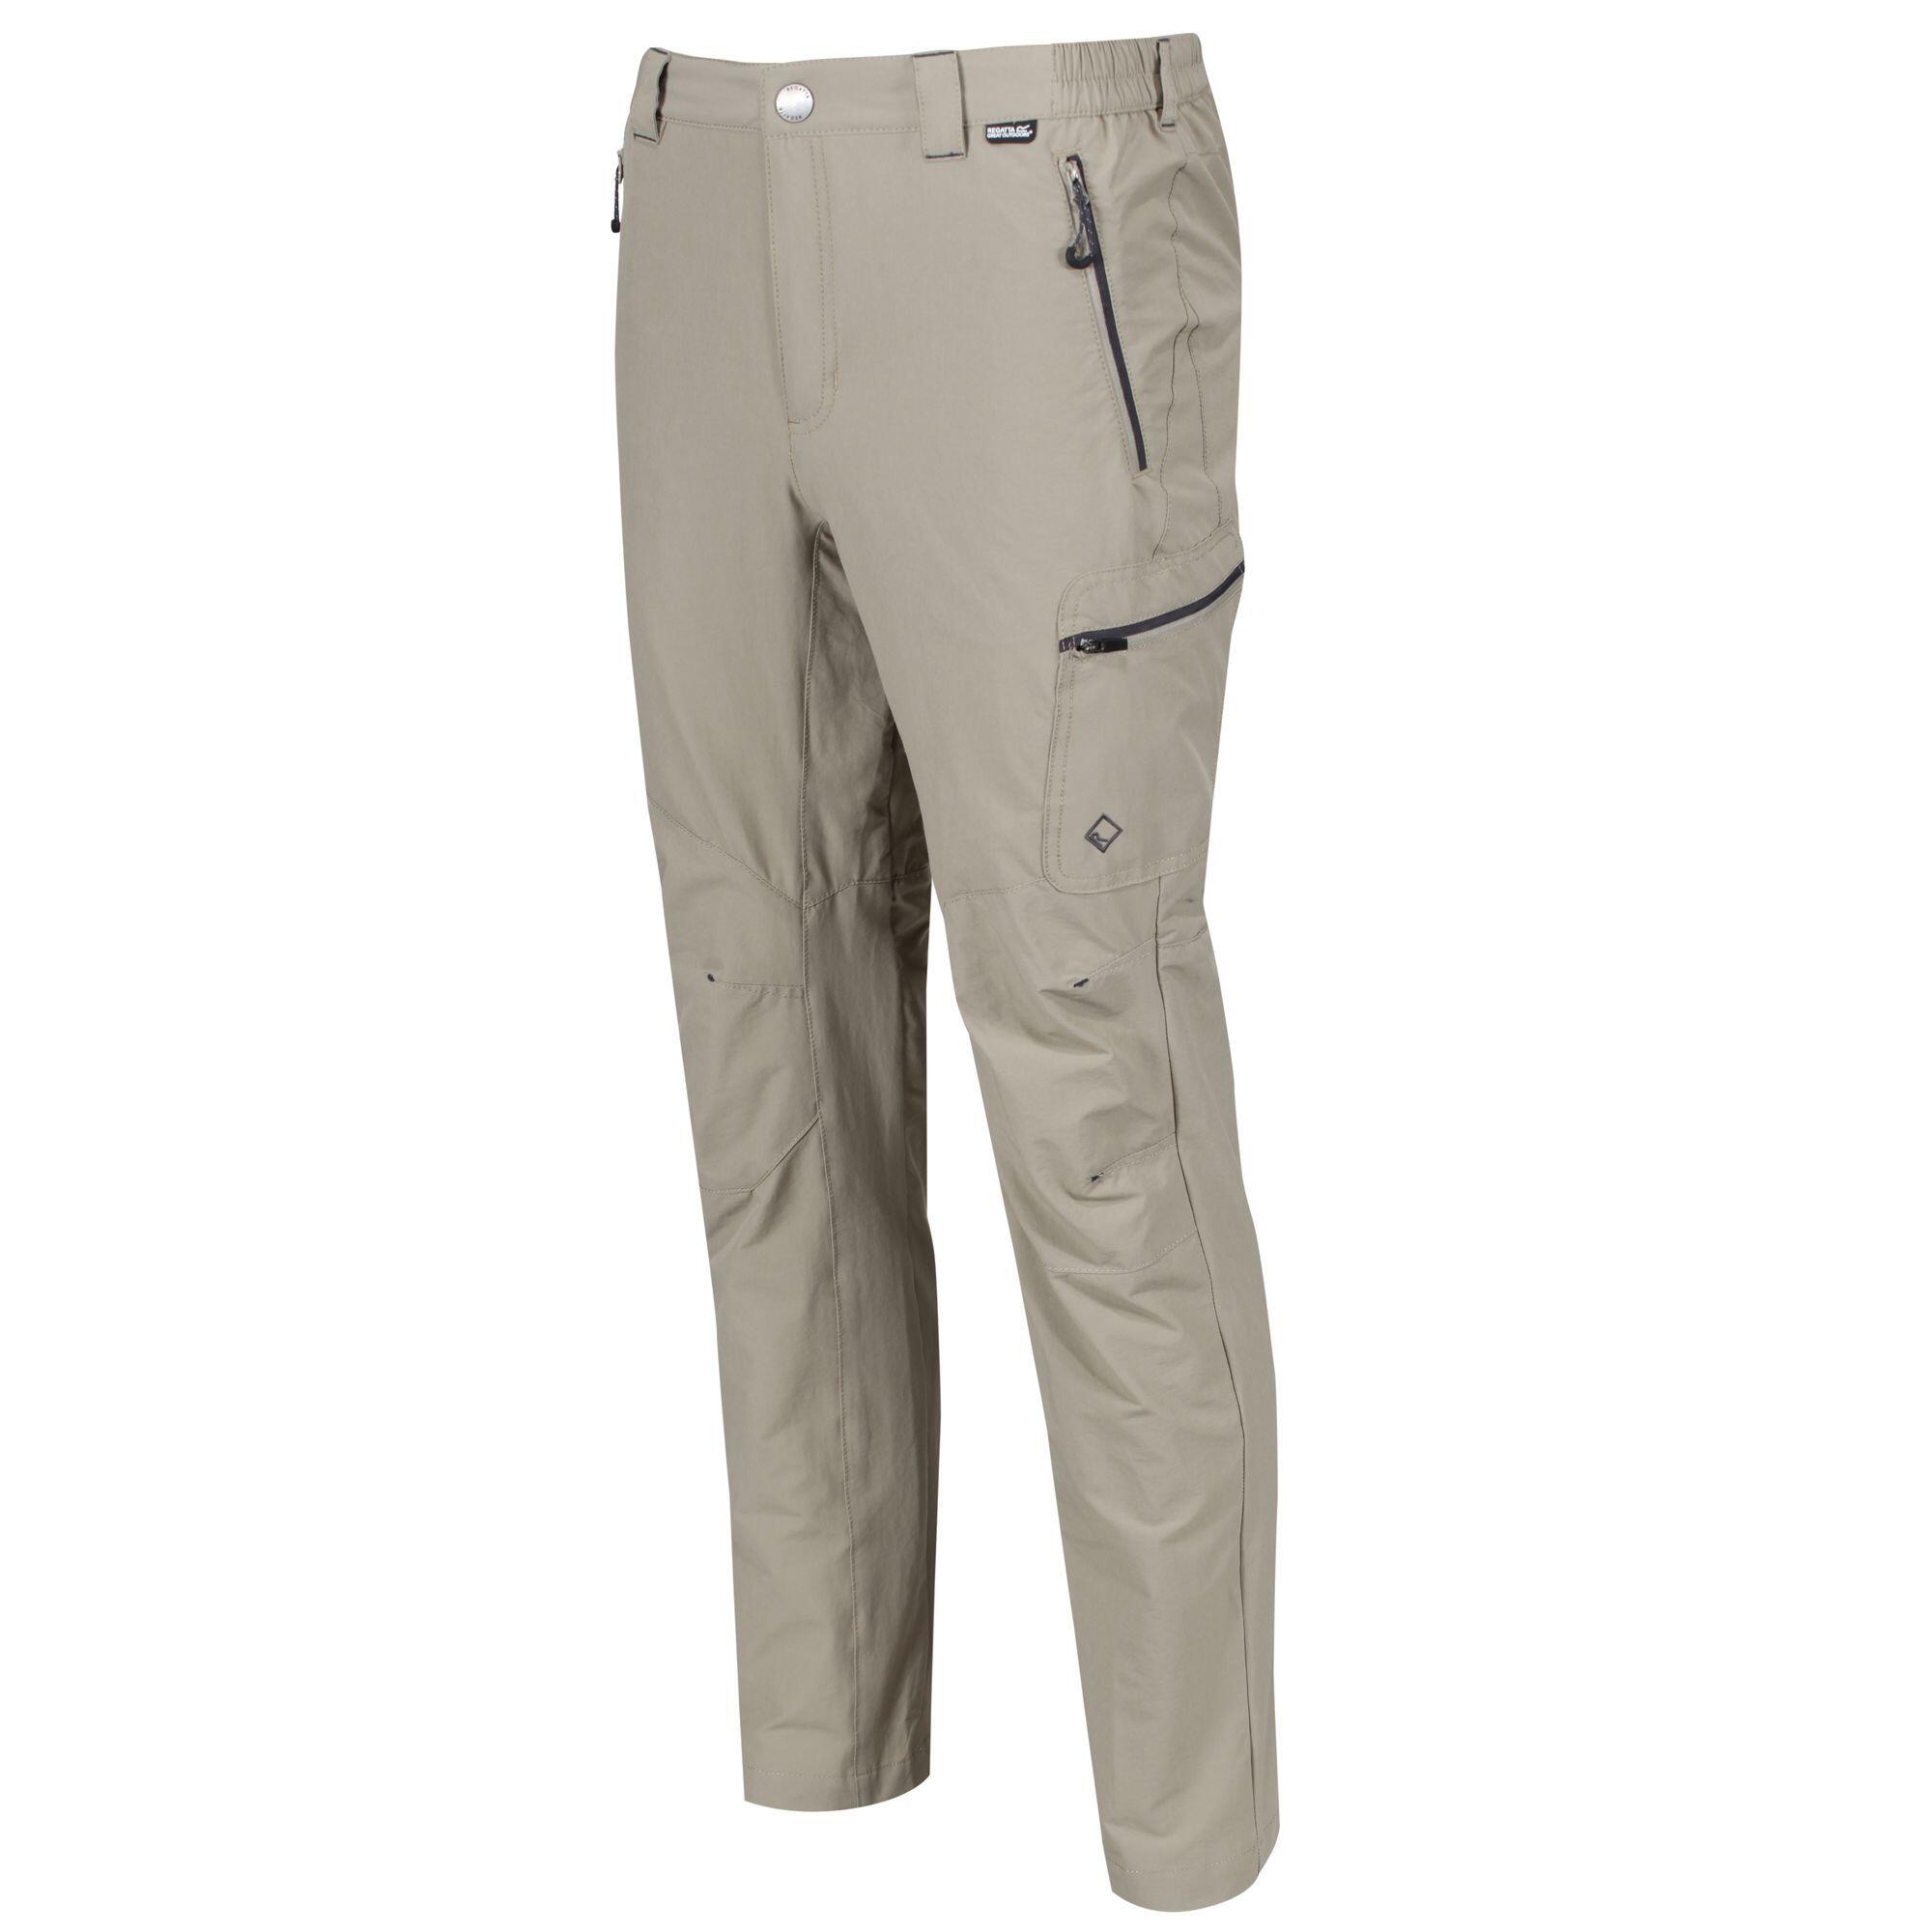 Mens Highton Zip Off Walking Trousers (Parchment White) 4/5